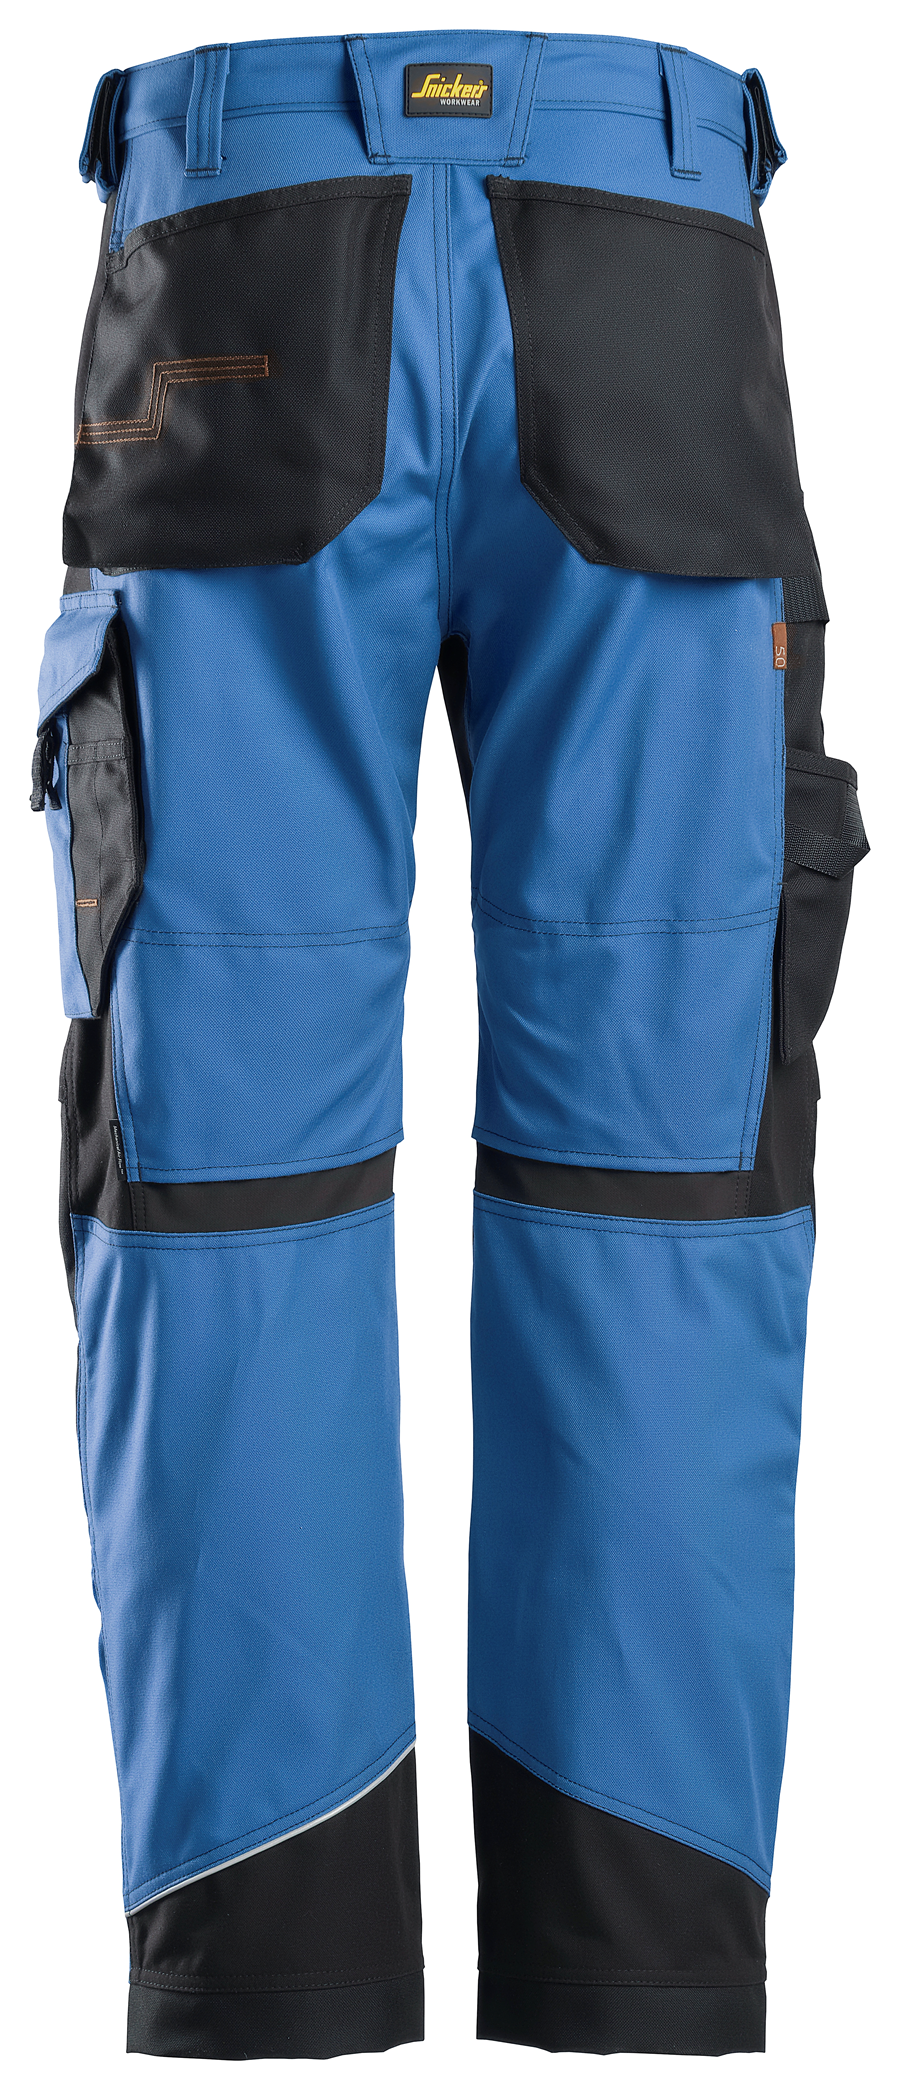 Snickers Workwear - 6972 FlexiWork, Work Trousers+ Detachable Holster  Pockets | trousers, handgun holster | Some days you don't know what you'll  be doing at work, until you start doing it. These